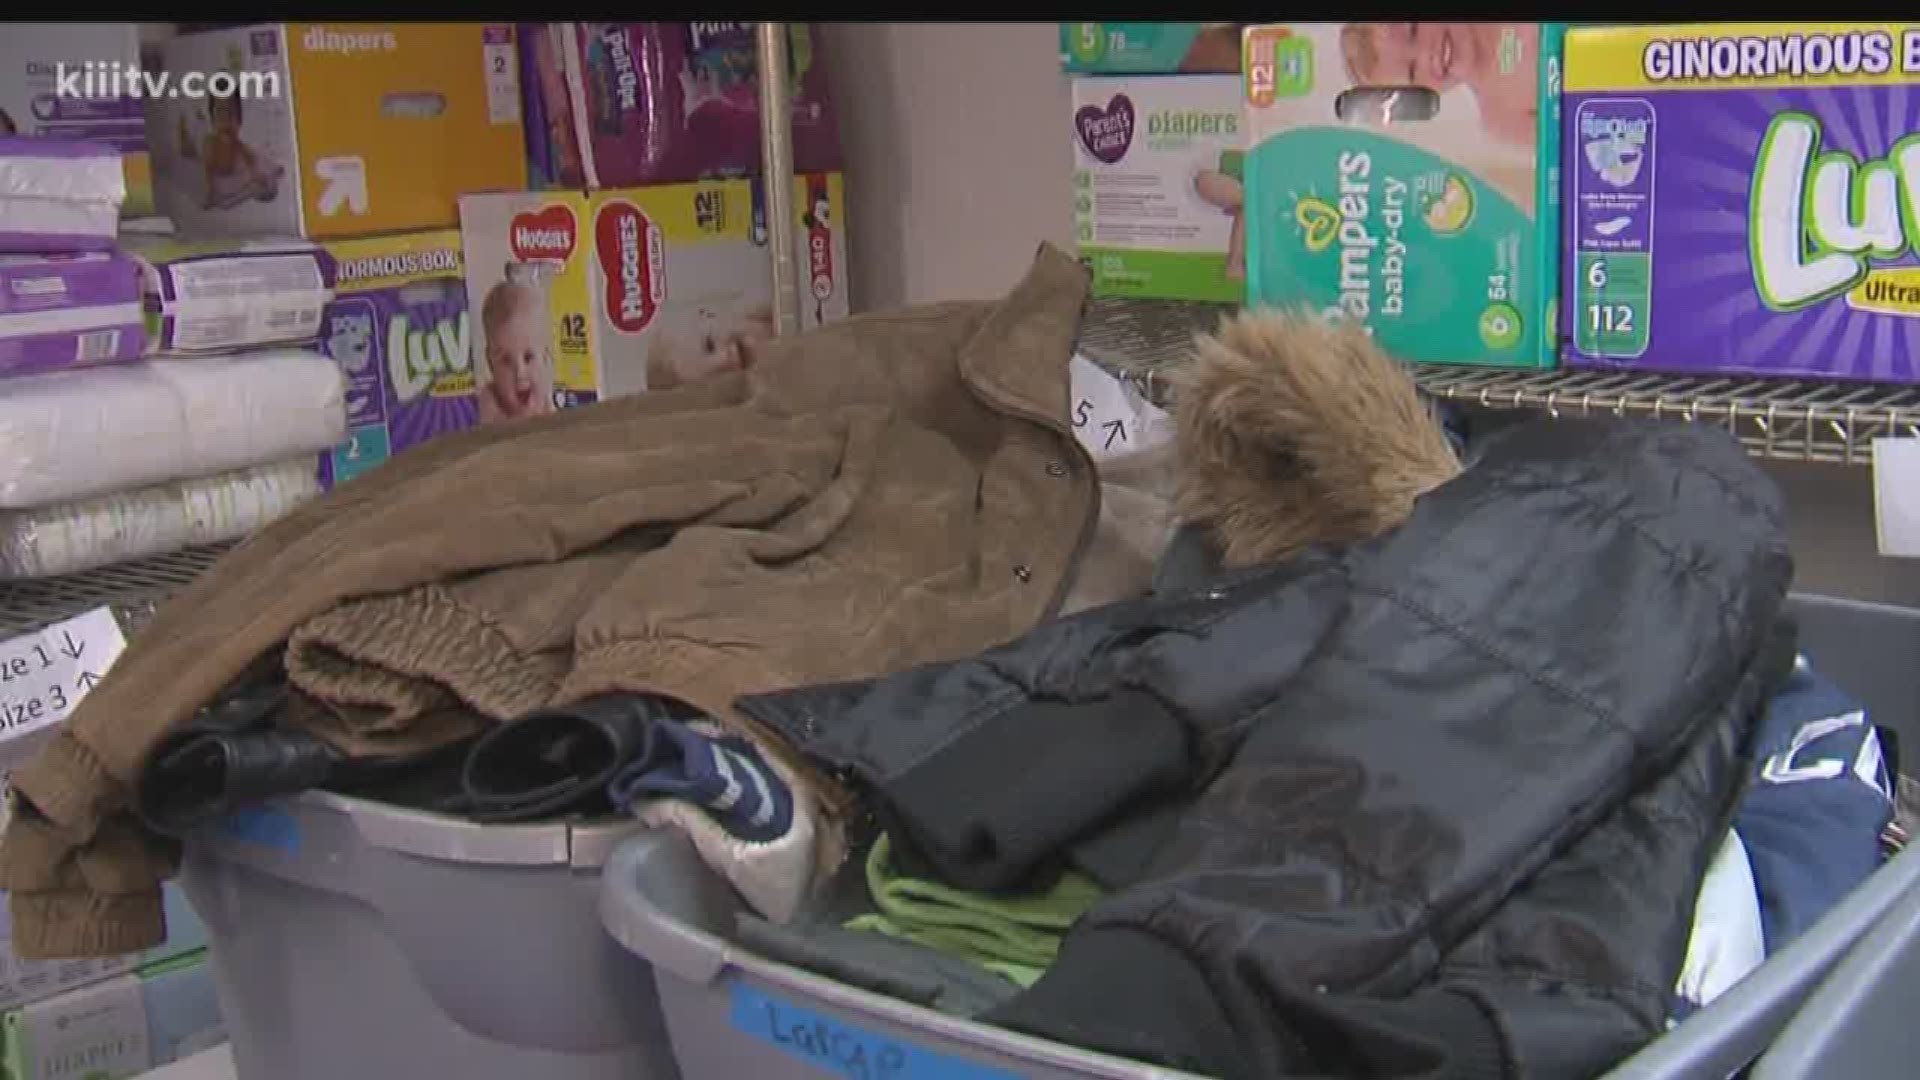 The homeless will be hunkering down ahead of freezing temperatures expected in the Coastal Bend Tuesday.